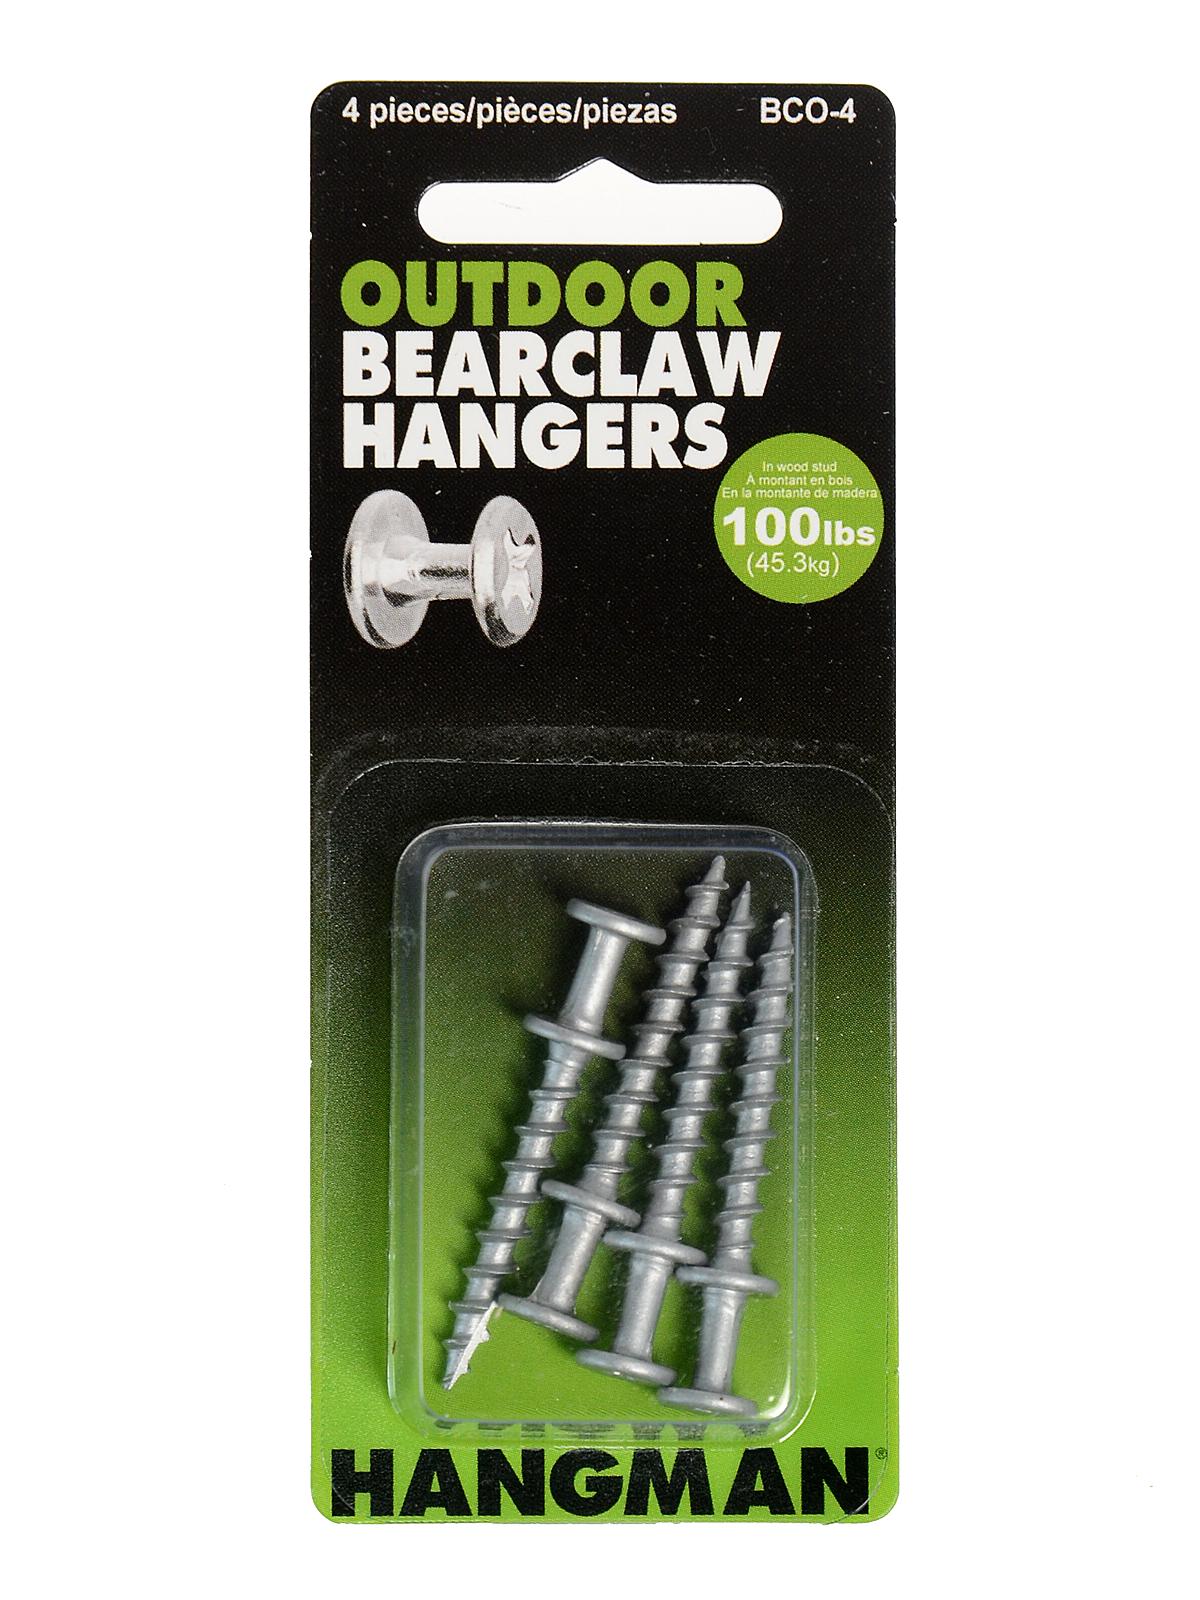 Bearclaw Hanger Outdoor Pack Of 4